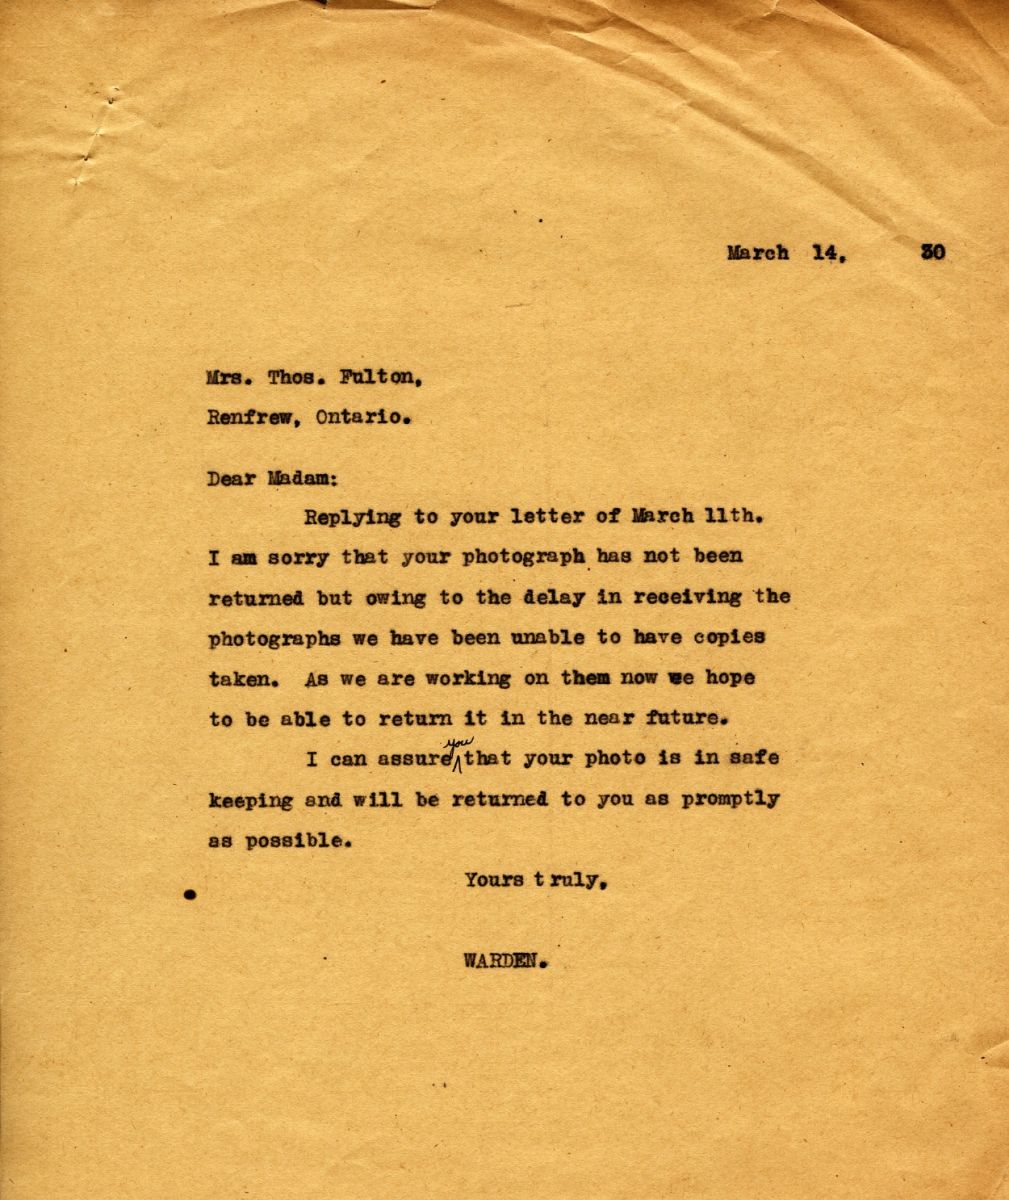 Letter from the Warden to Mrs. Thos Fulton, 14th March 1930